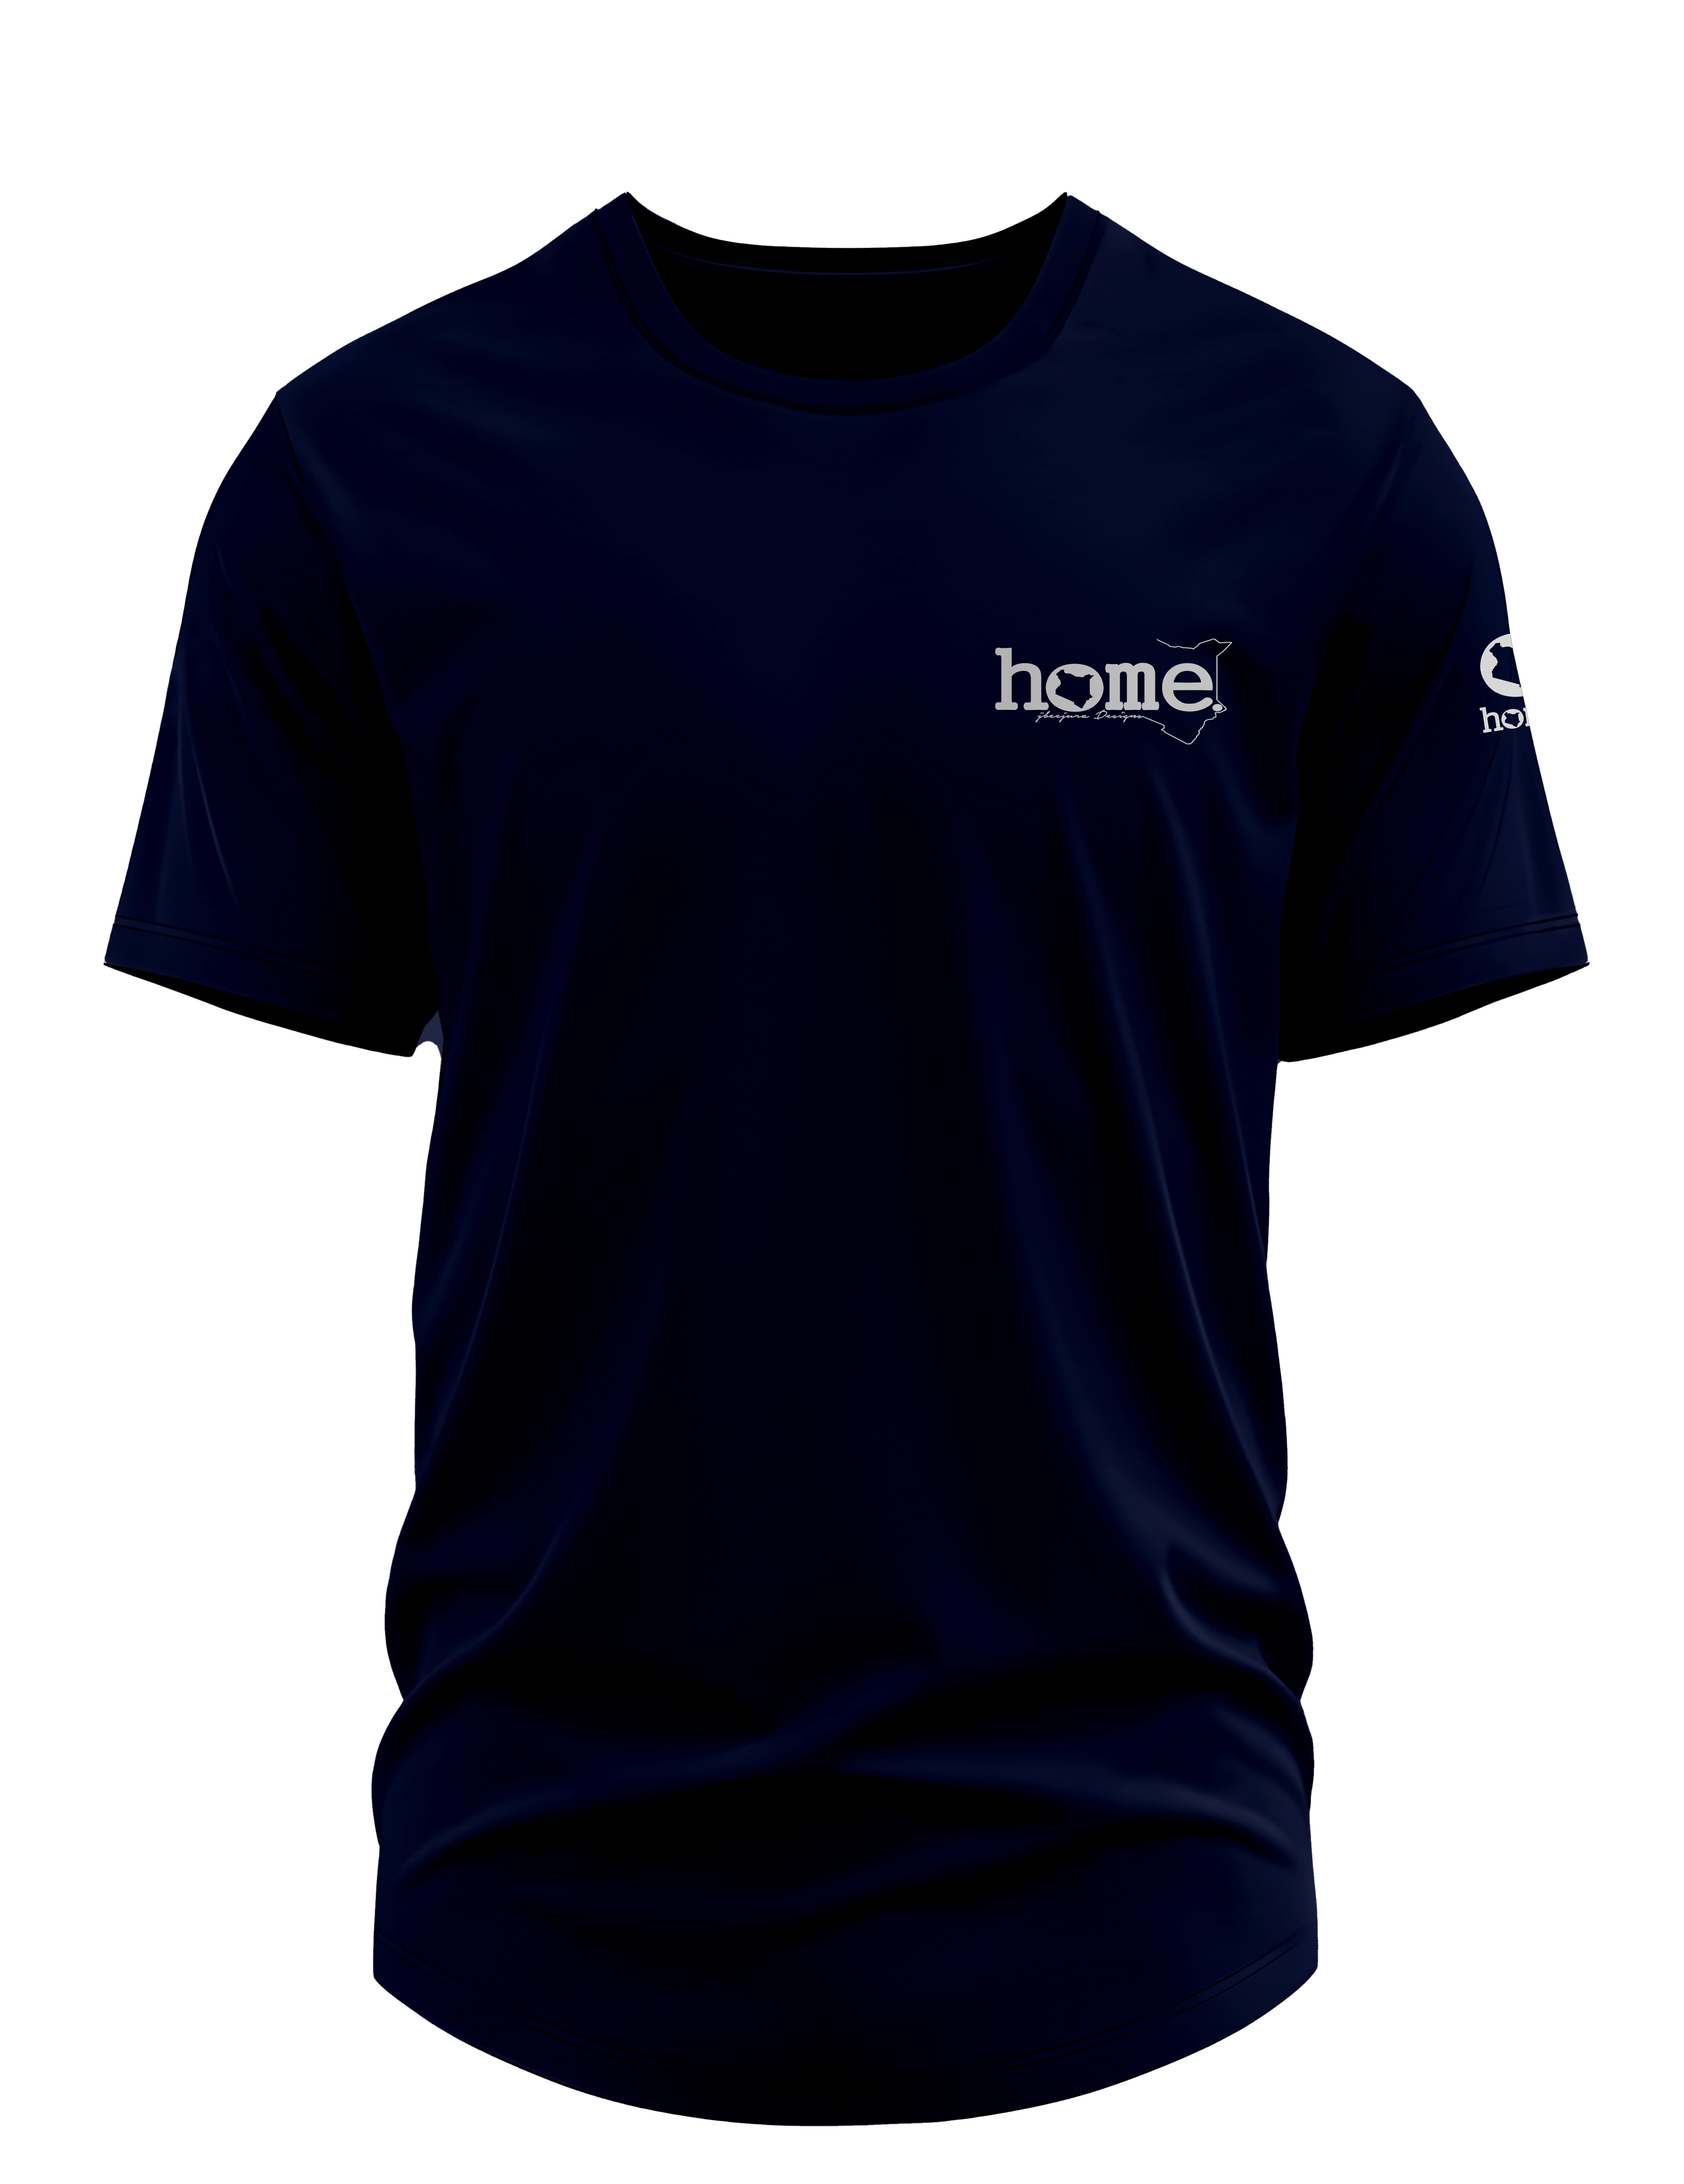 home_254 SHORT-SLEEVED NAVY BLUE CURVED HEM T-SHIRT WITH A SILVER TAG PRINT – CLASSIC MAN COLLECTION